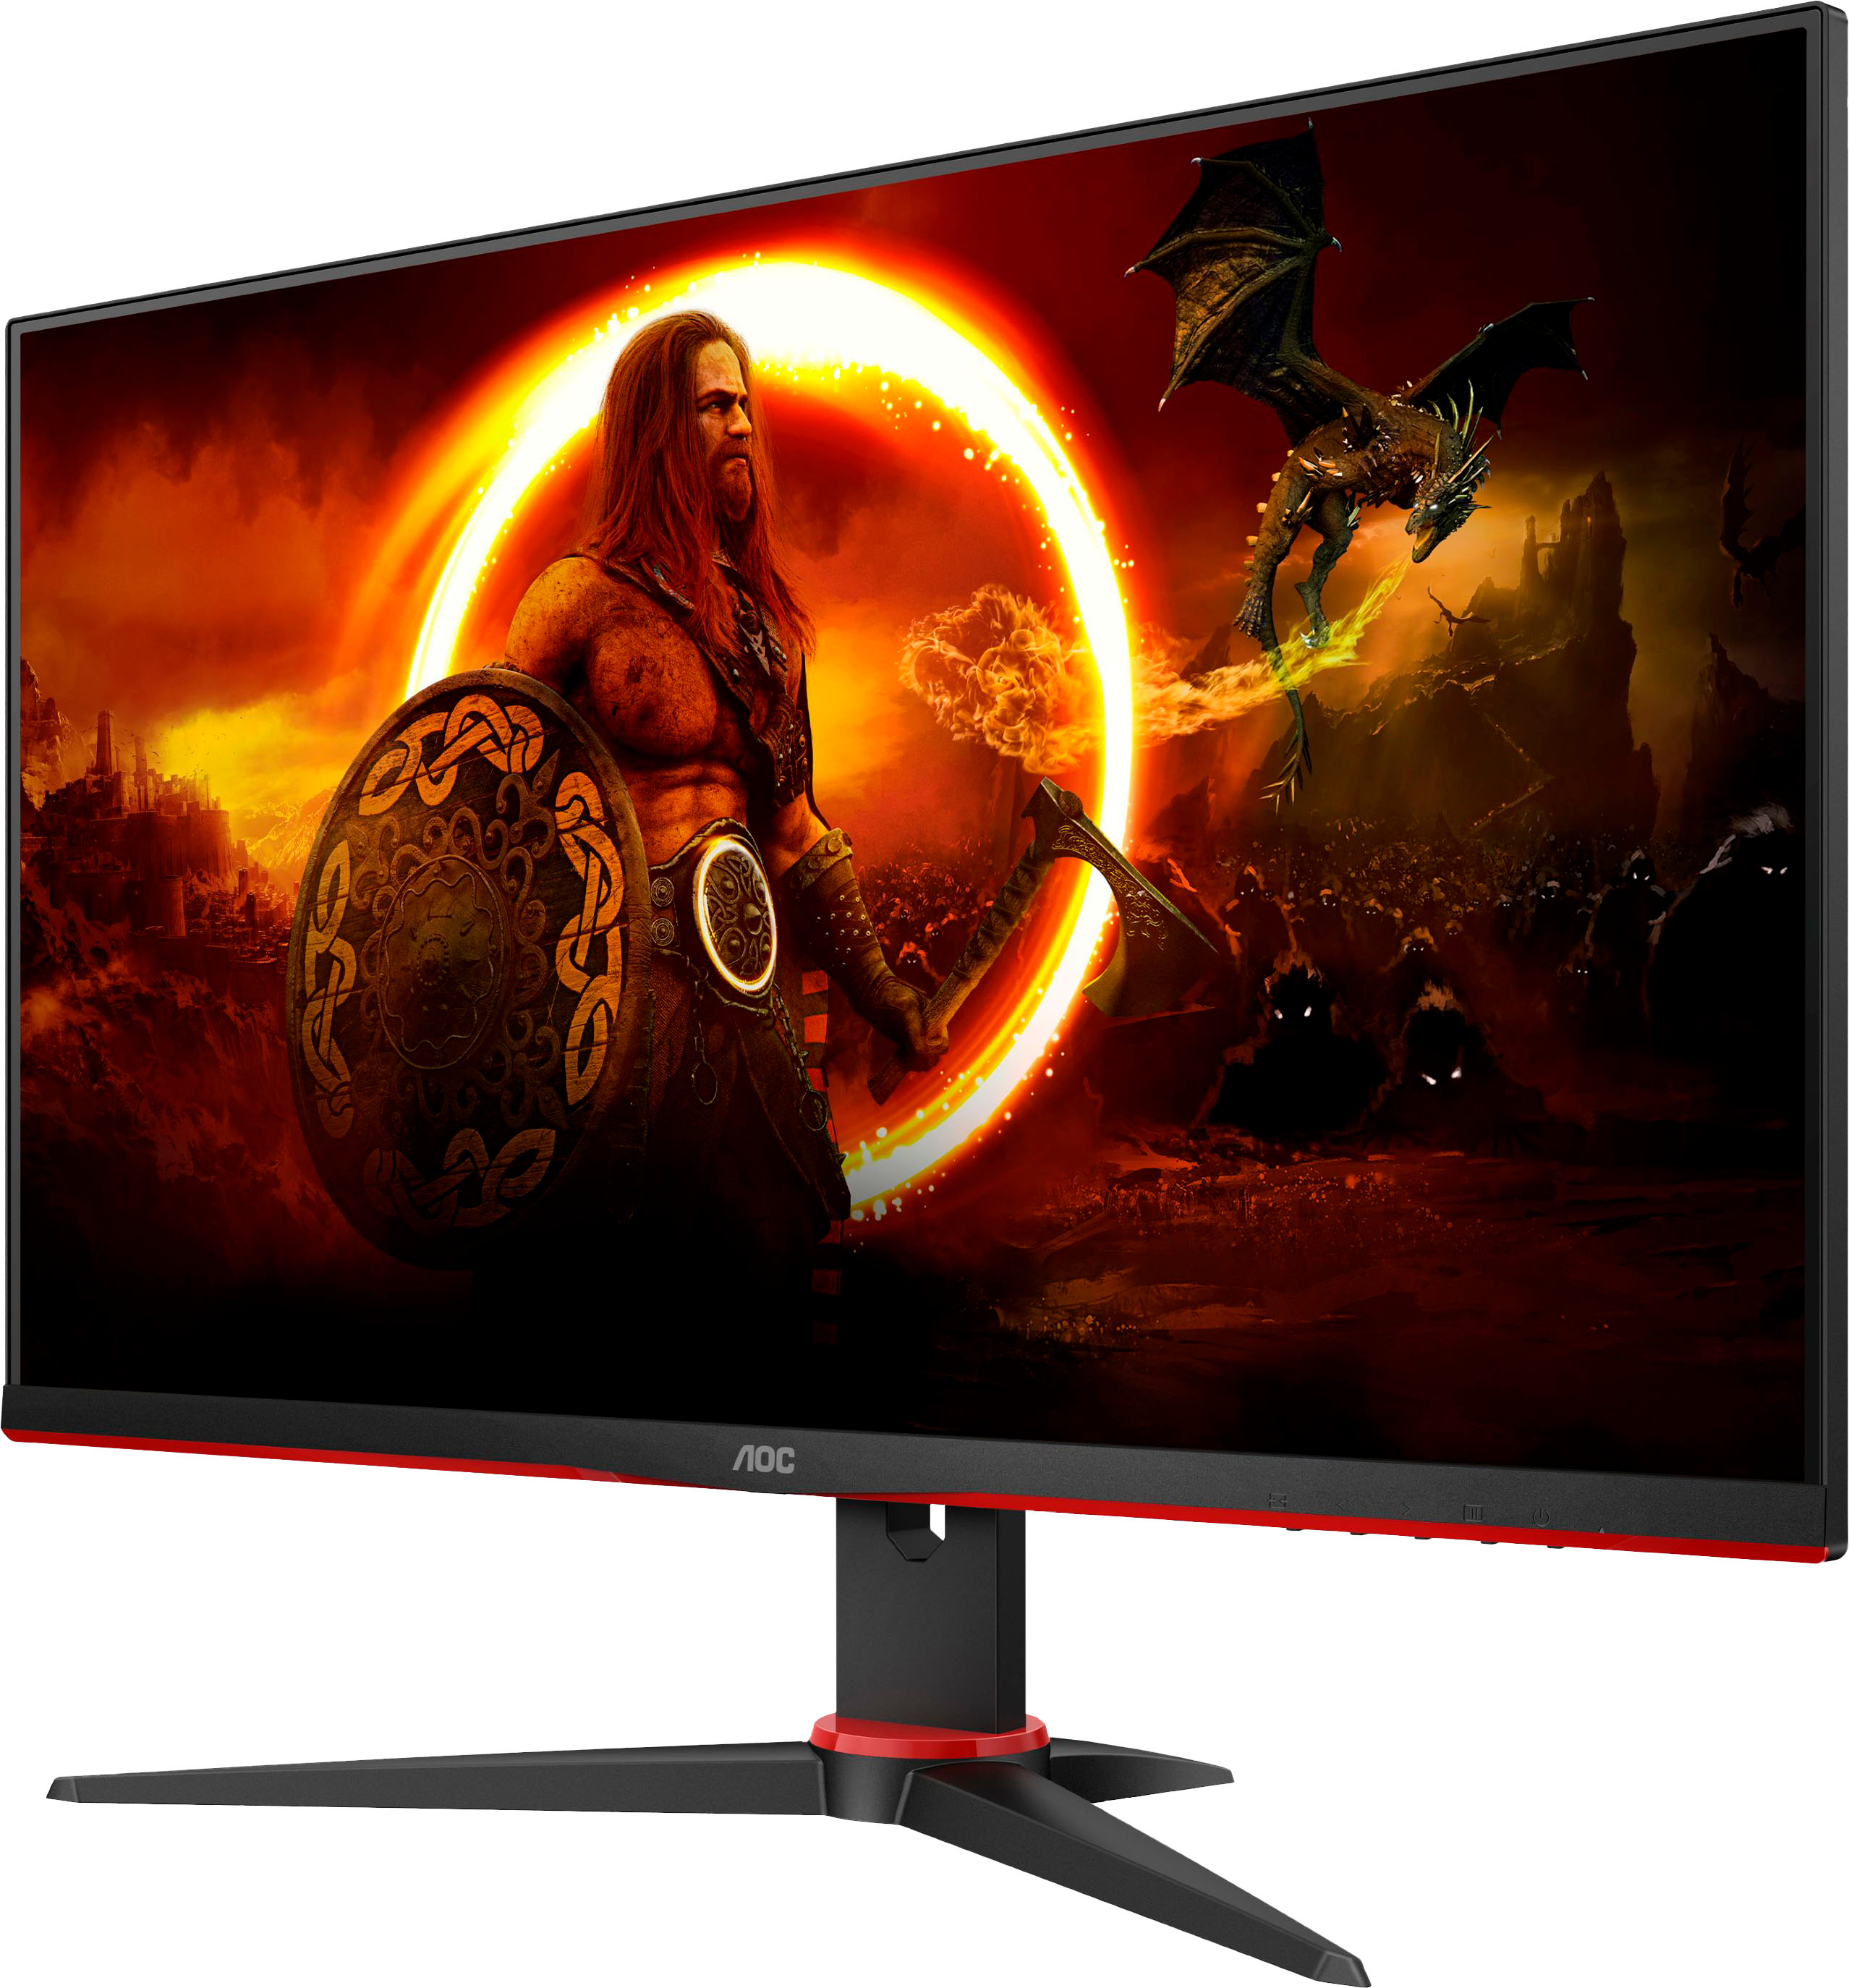 Left View: AOC - 27G2SPE 27" LCD FHD Gaming Monitor - Black/Red